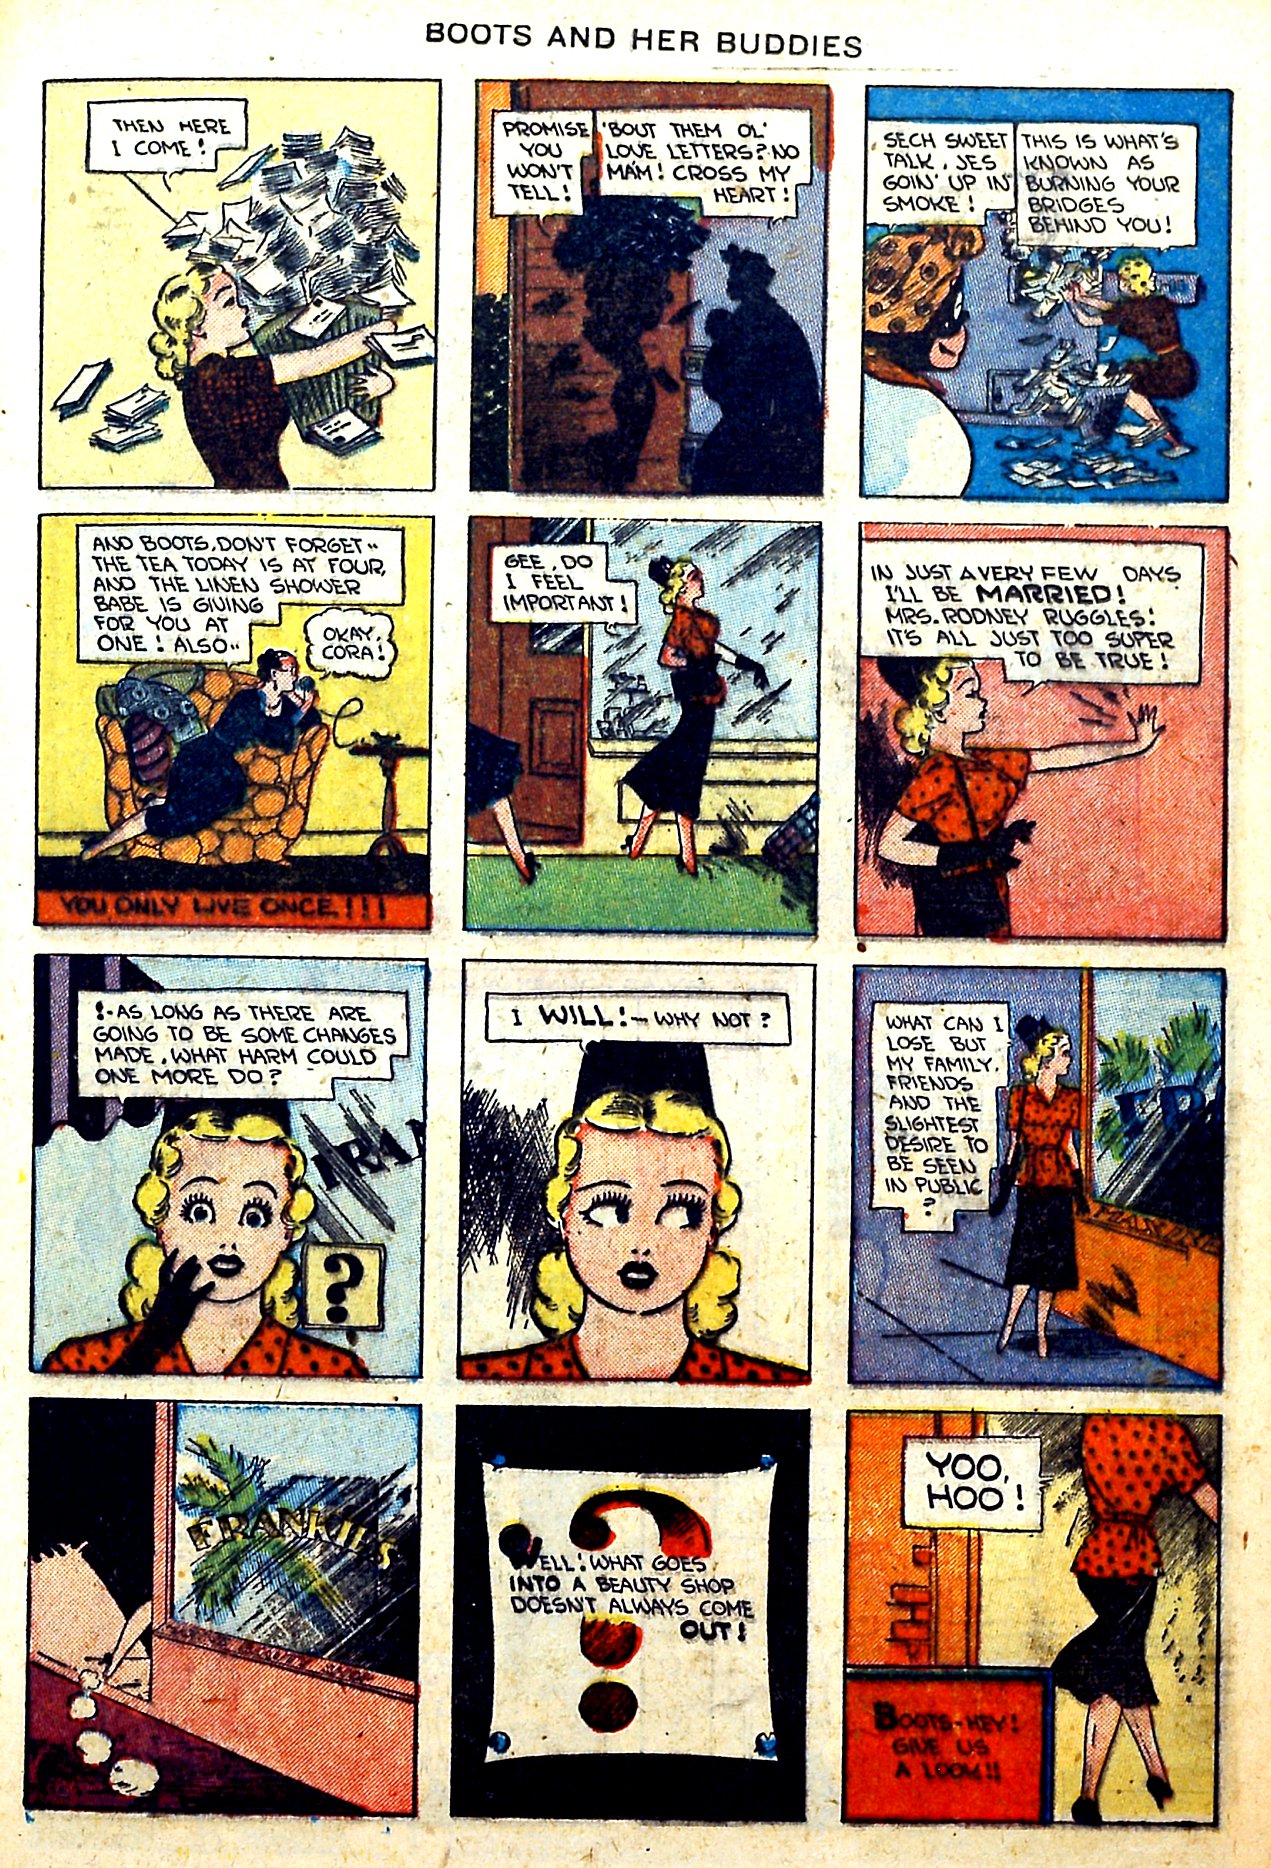 Read online Boots and Her Buddies (1948) comic -  Issue #8 - 25